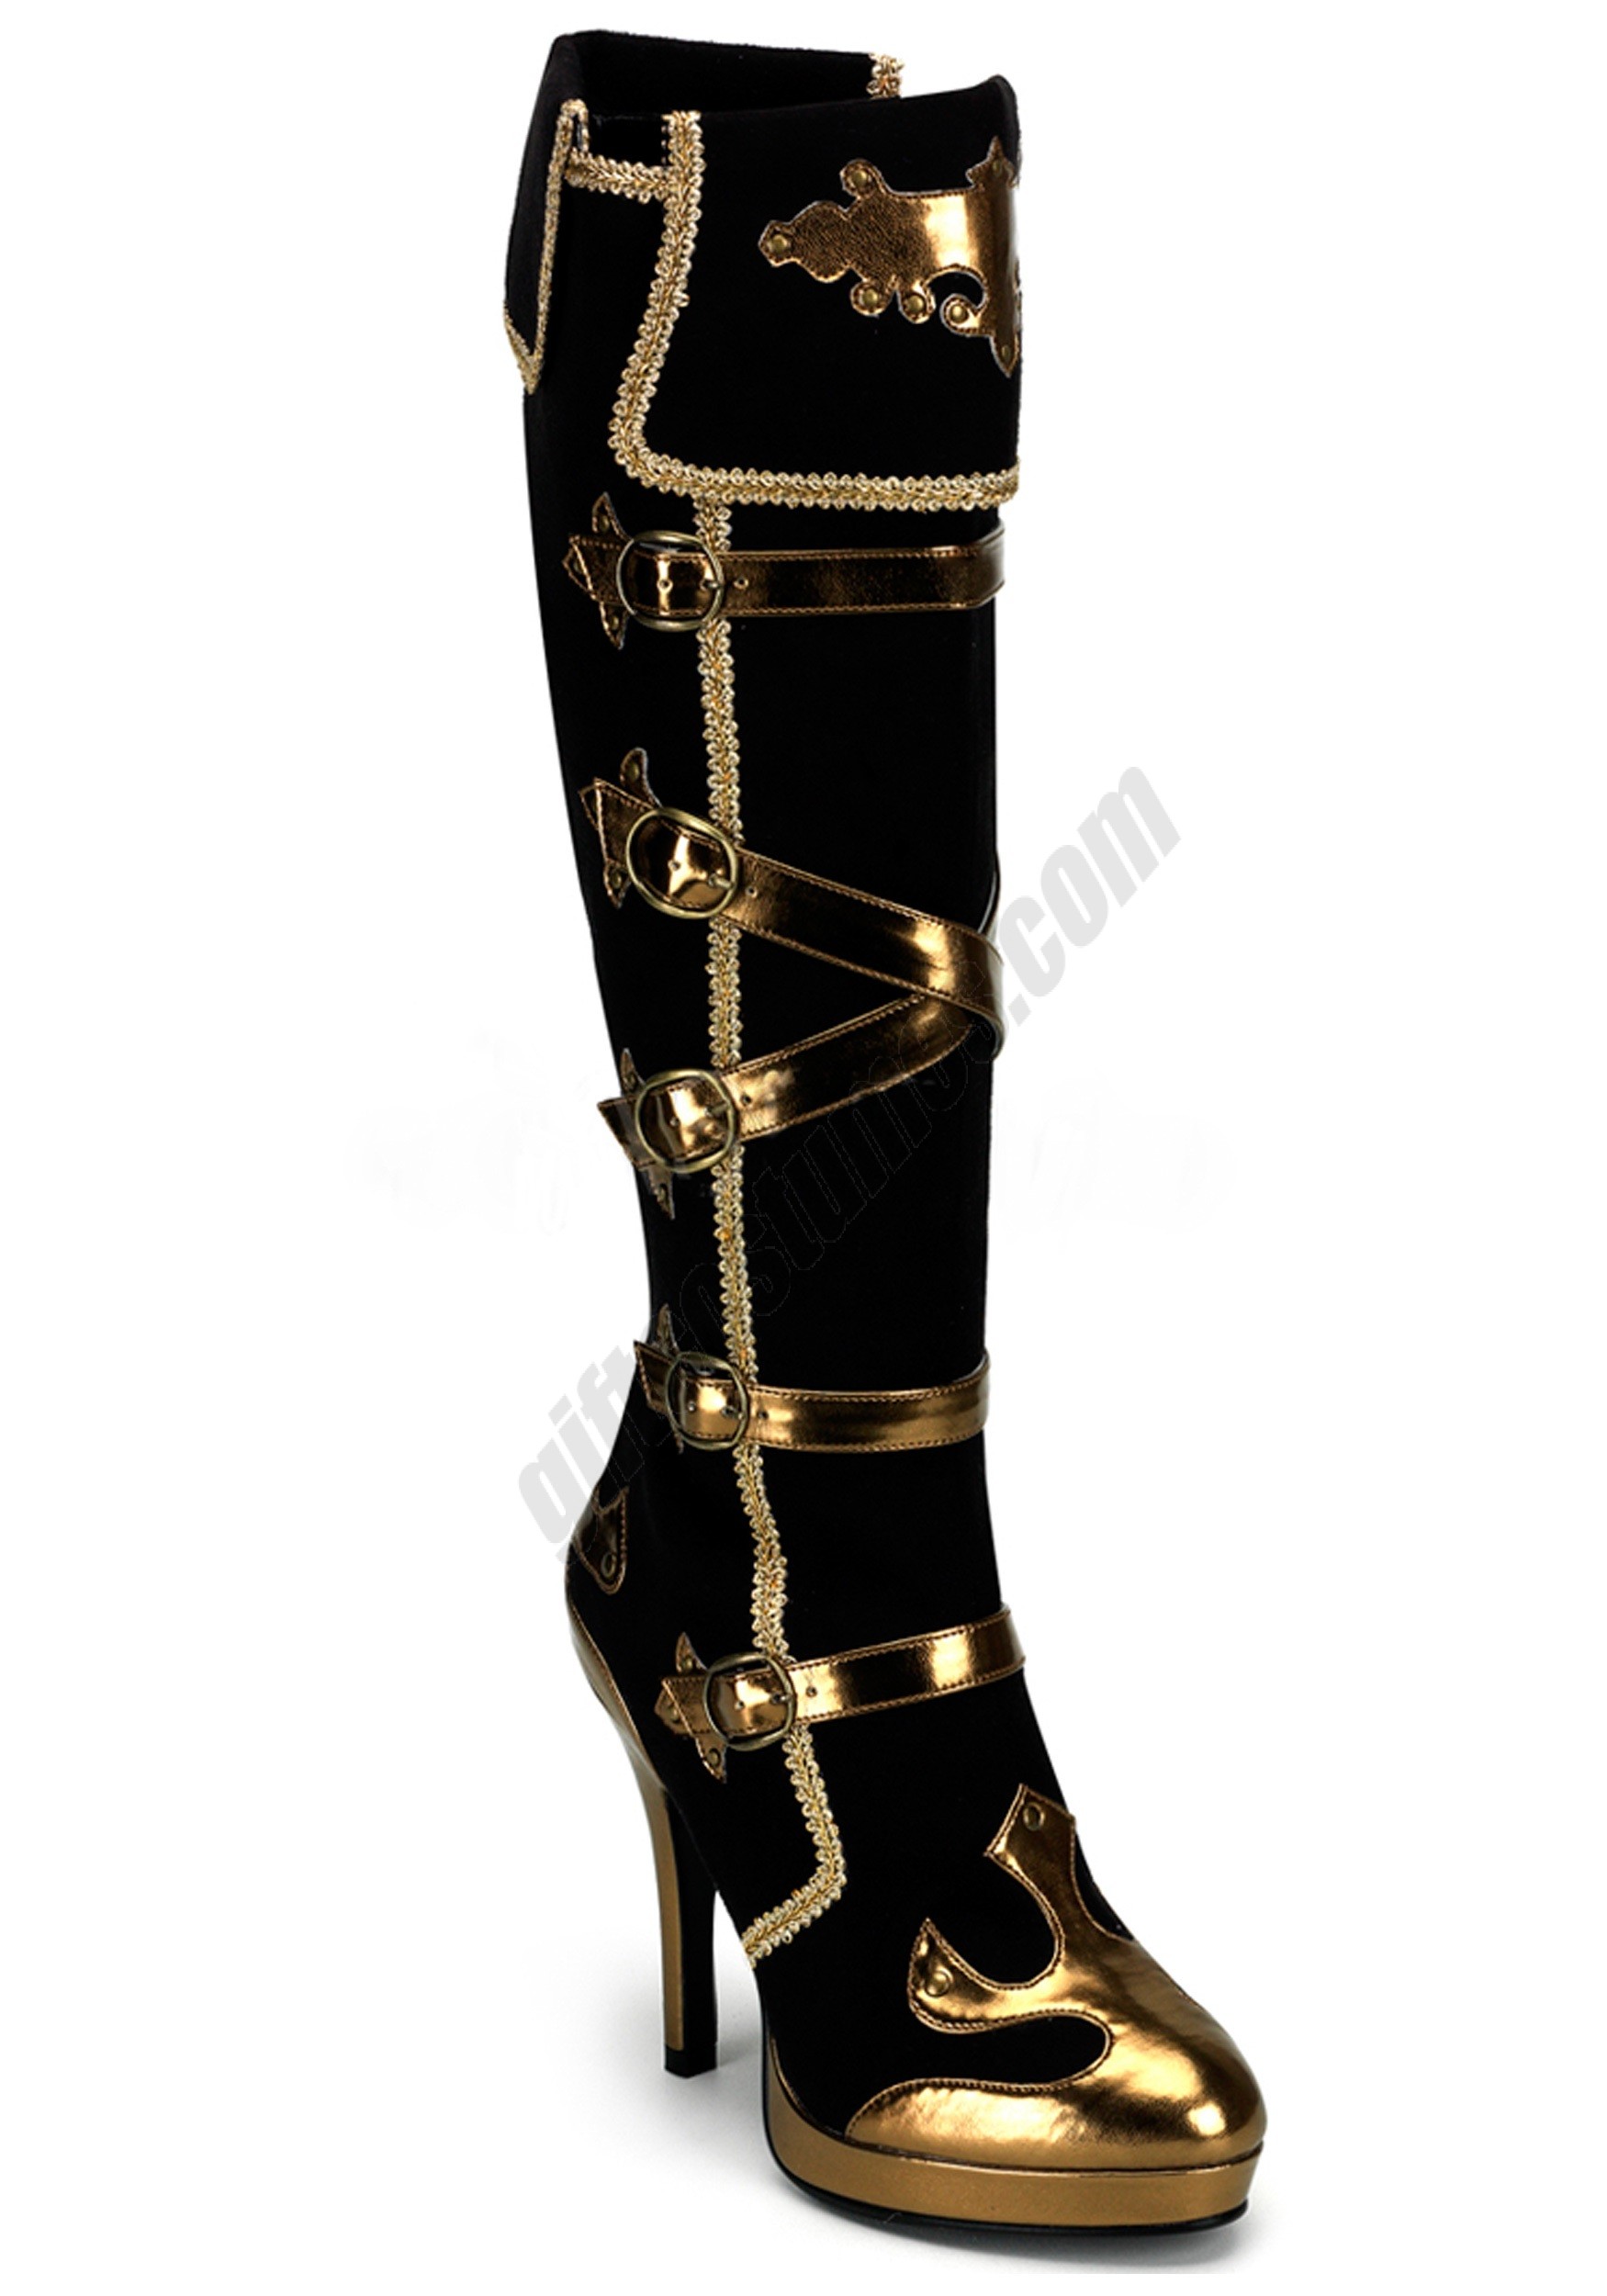 Sexy Black and Gold Pirate Boots Promotions - Sexy Black and Gold Pirate Boots Promotions